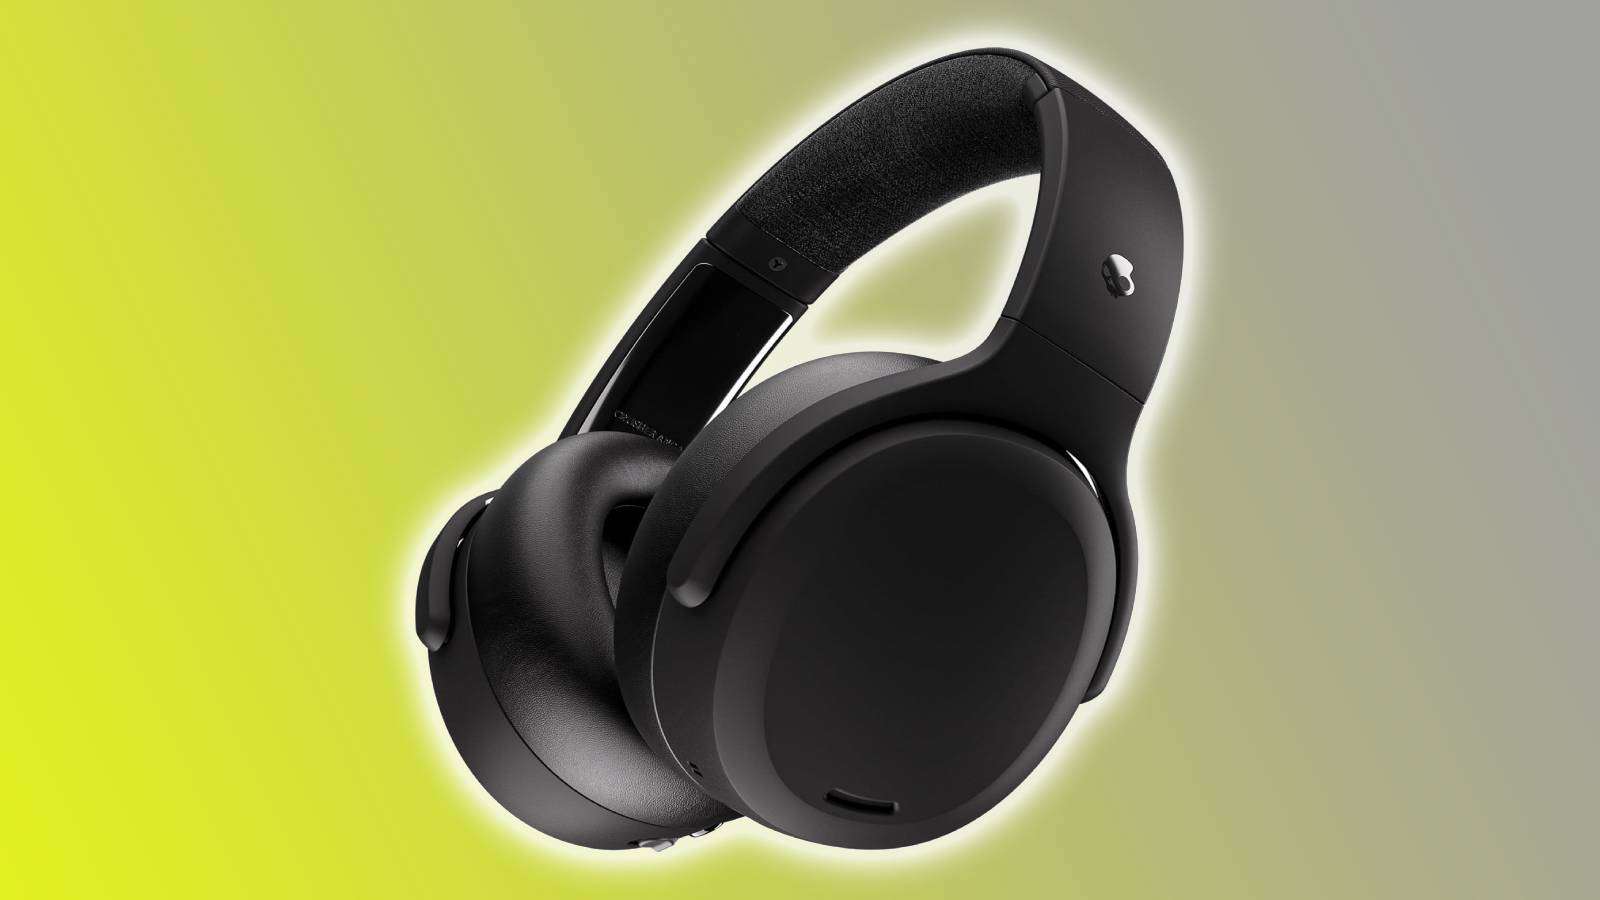 Image of the Skullcandy Crusher ANC 2 noise-canceling headphones on a yellow and gray background.